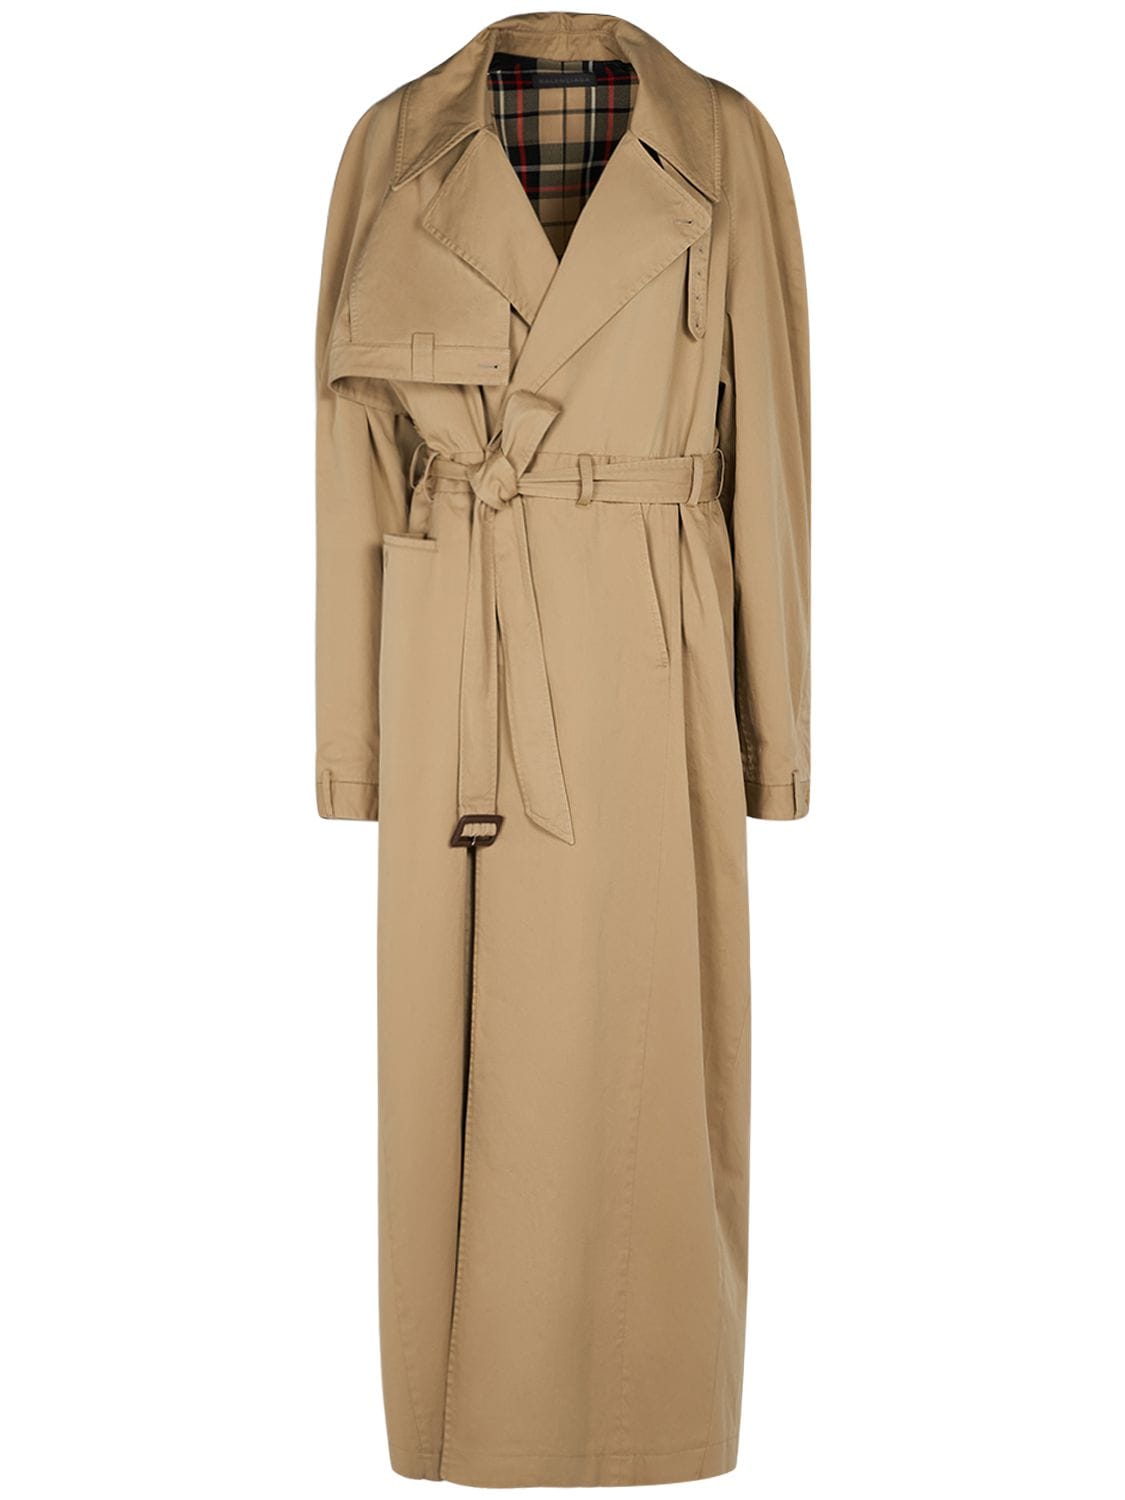 Image of Cotton Twill Trench Coat